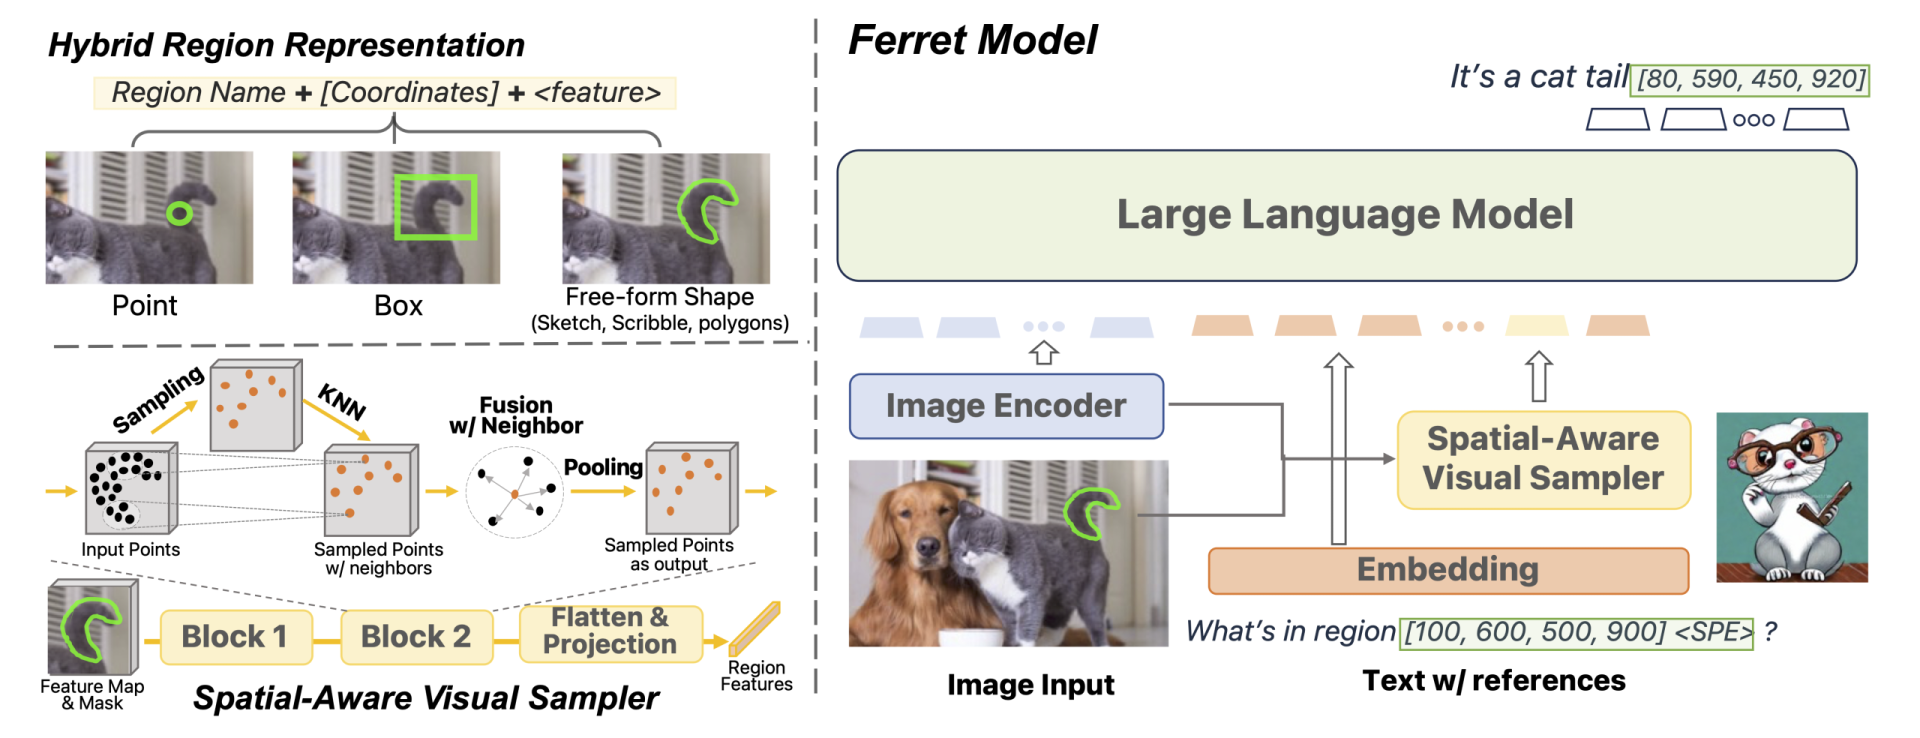 Apple Throws Its Hat Into The Ring With A Generative Mllm Named Ferret